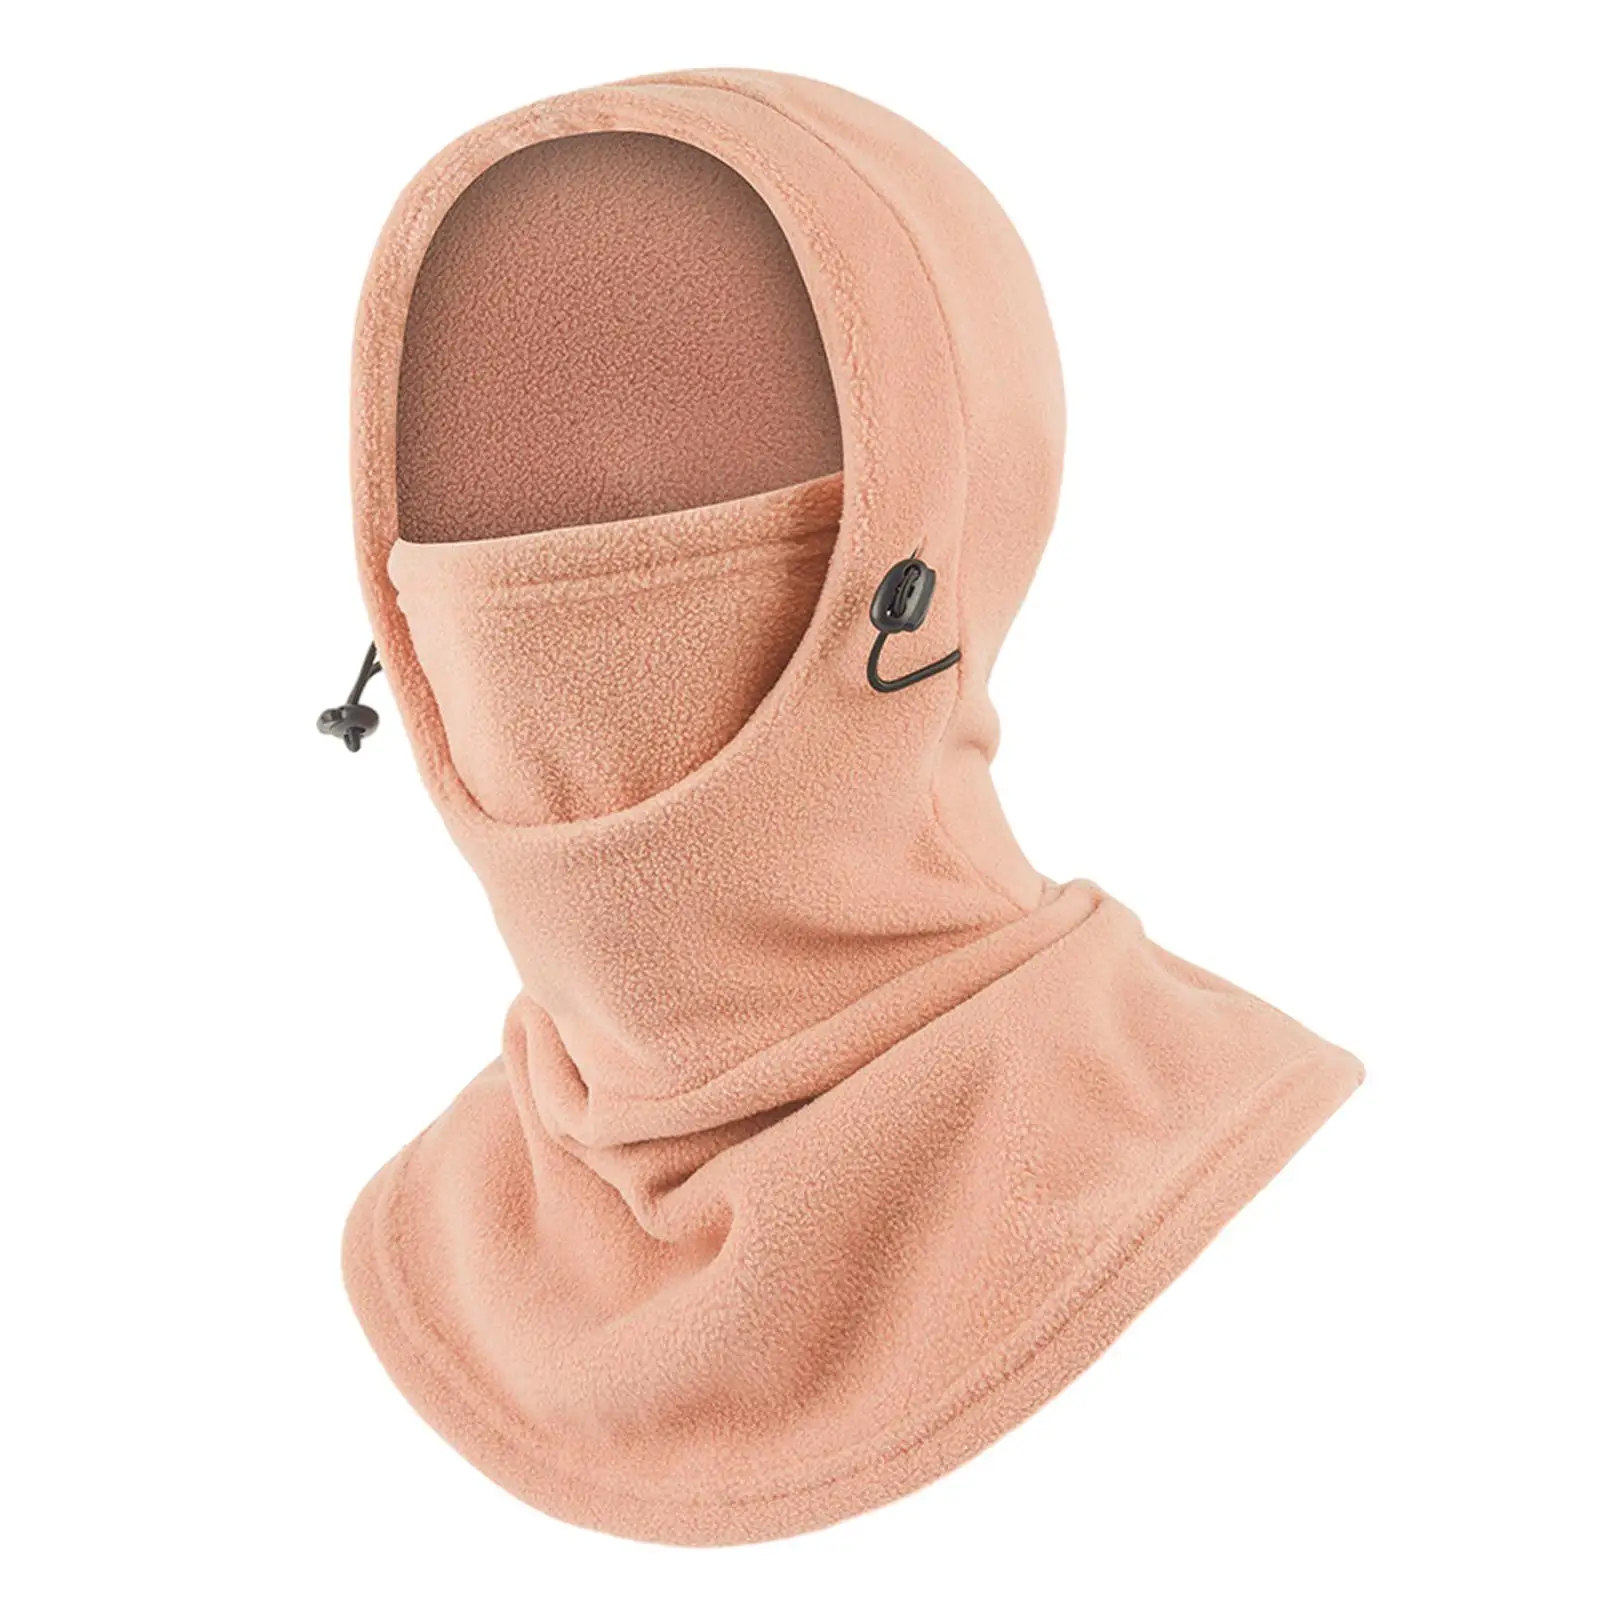 Ski Mask Balaclava Face Cove Thermal Headwear Windproof Hood Face Mask for Camping Biking Riding Outdoor Activities Fishing